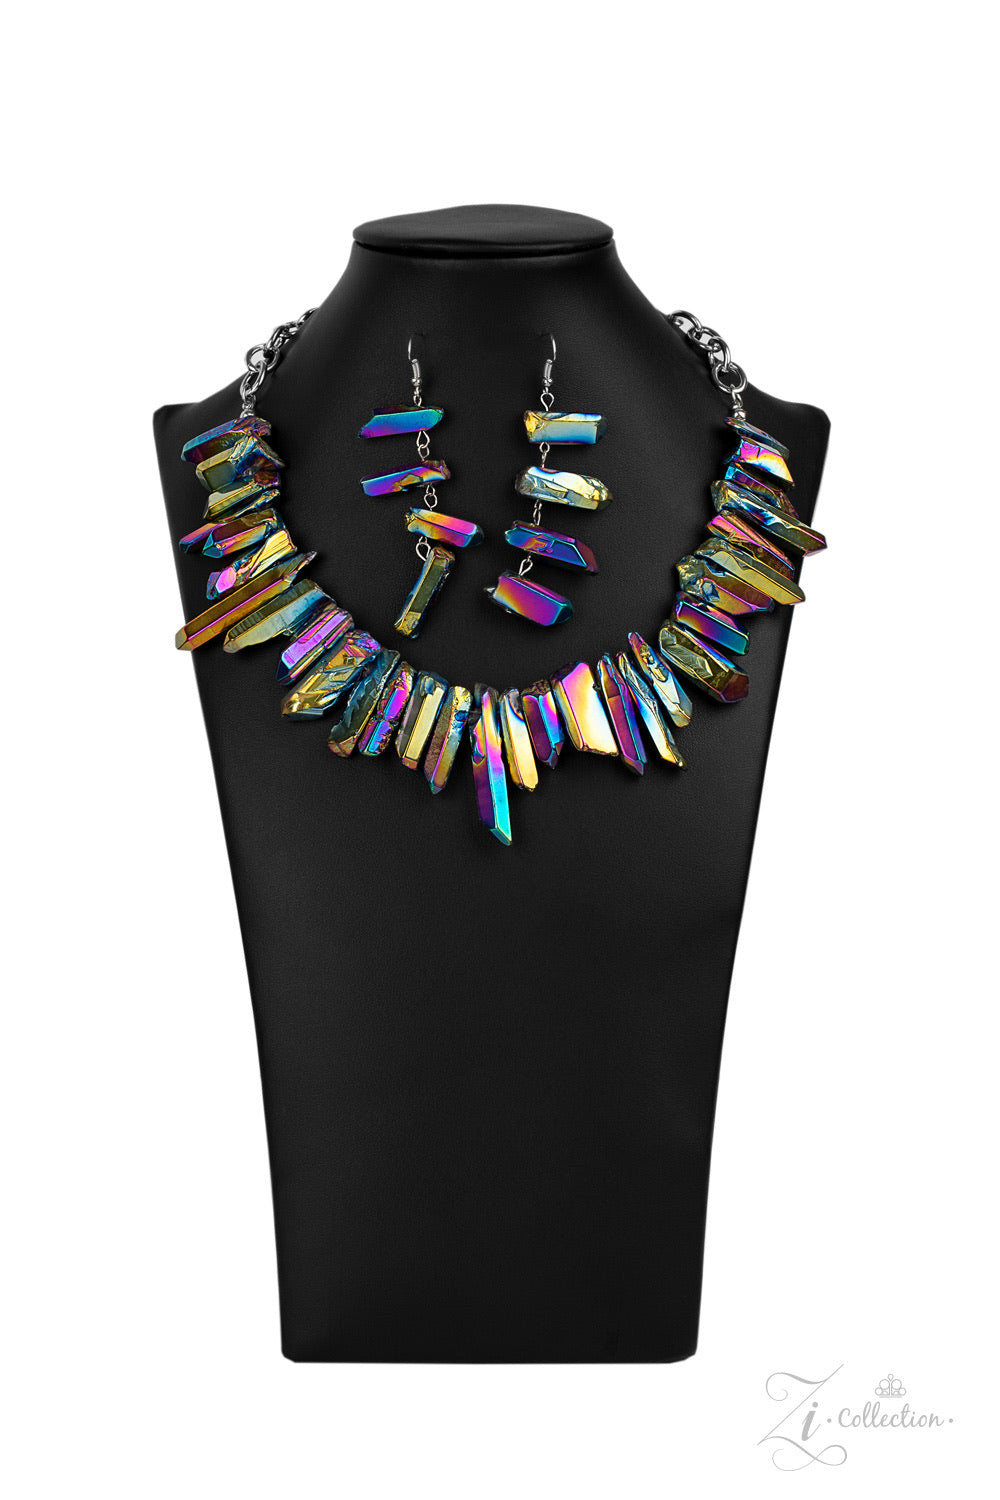 Paparazzi Accessories - The Charismatic Zi Collection set. Featuring an oil spill iridescence, raw cut pieces of hematite are threaded along an invisible wire below the collar for a colorfully courageous look. Features an adjustable clasp closure.